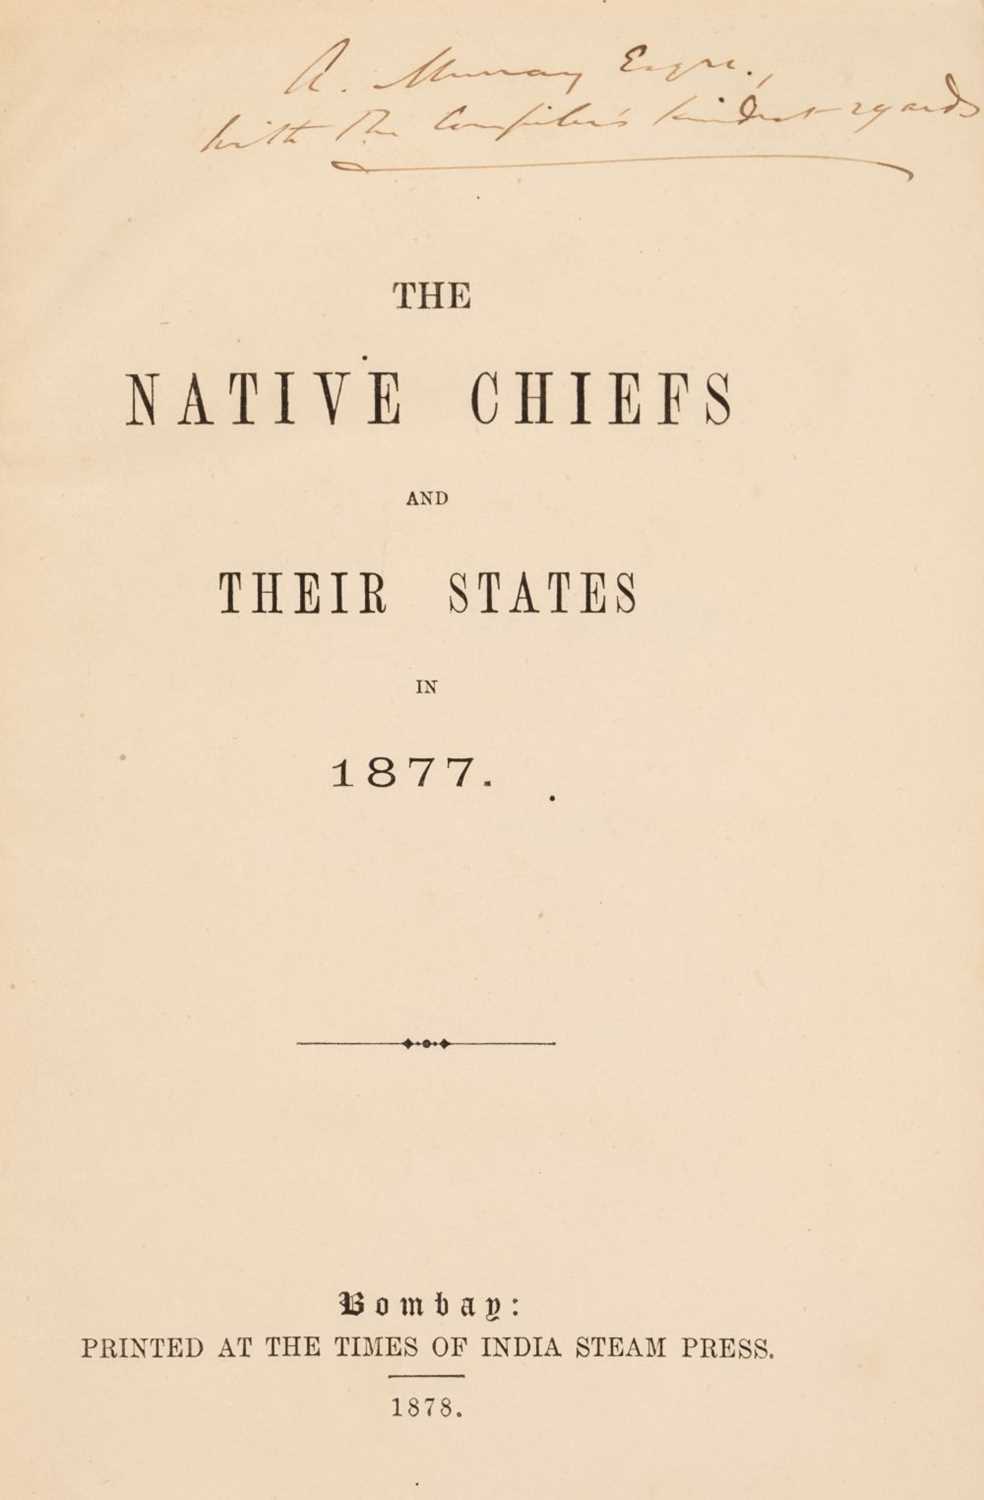 Lot 1 - Aberigh-Mackay (George). The Native Chiefs and Their States in 1877, 2 parts in 1, presentation copy, 1878